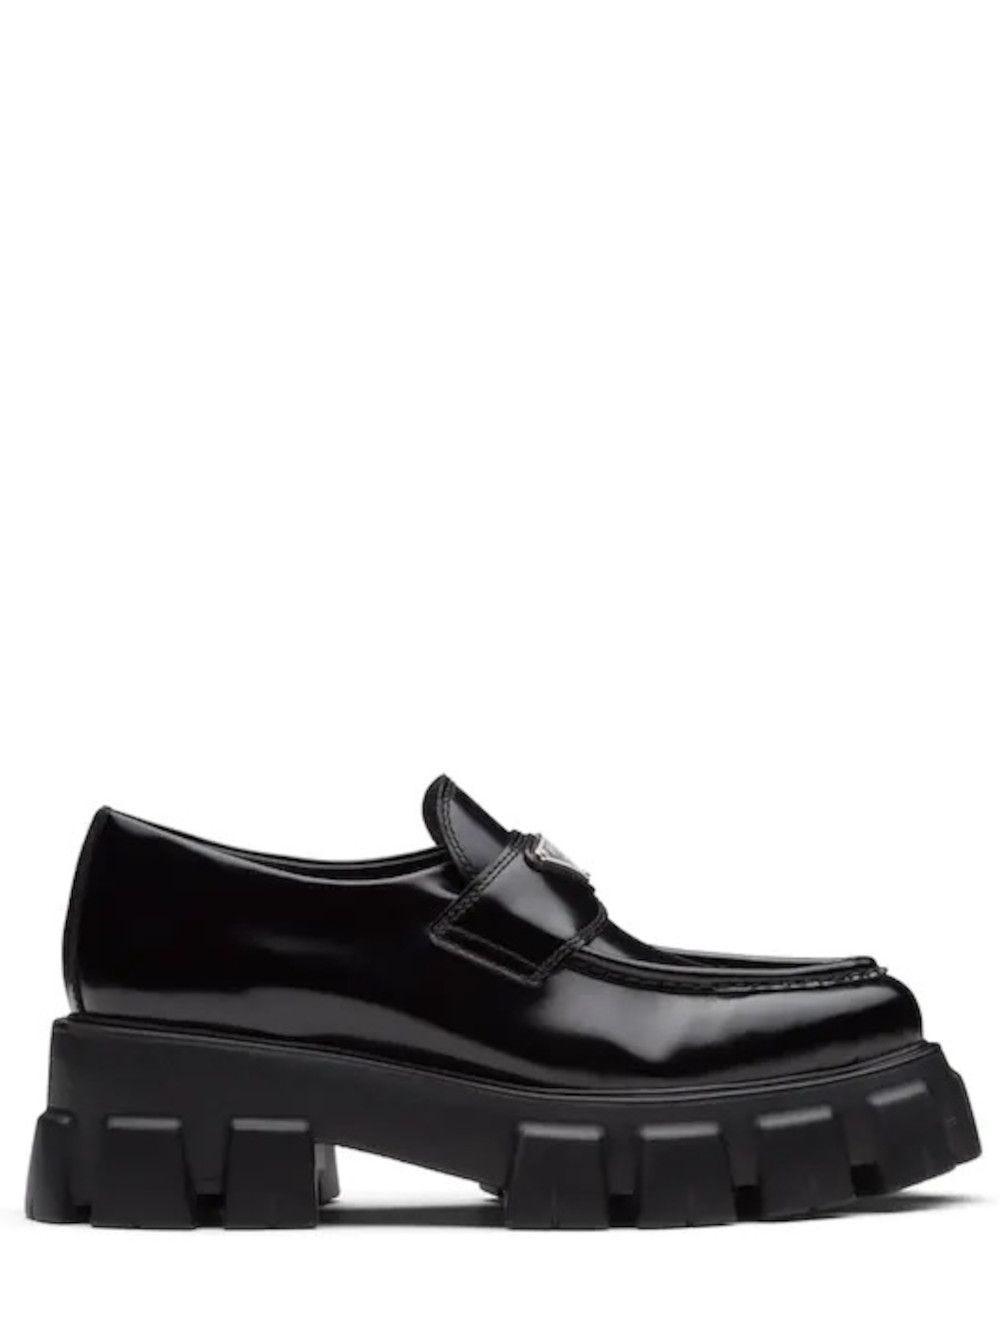 Prada Black Monolith Brushed Leather Pointed Loafers | Lyst